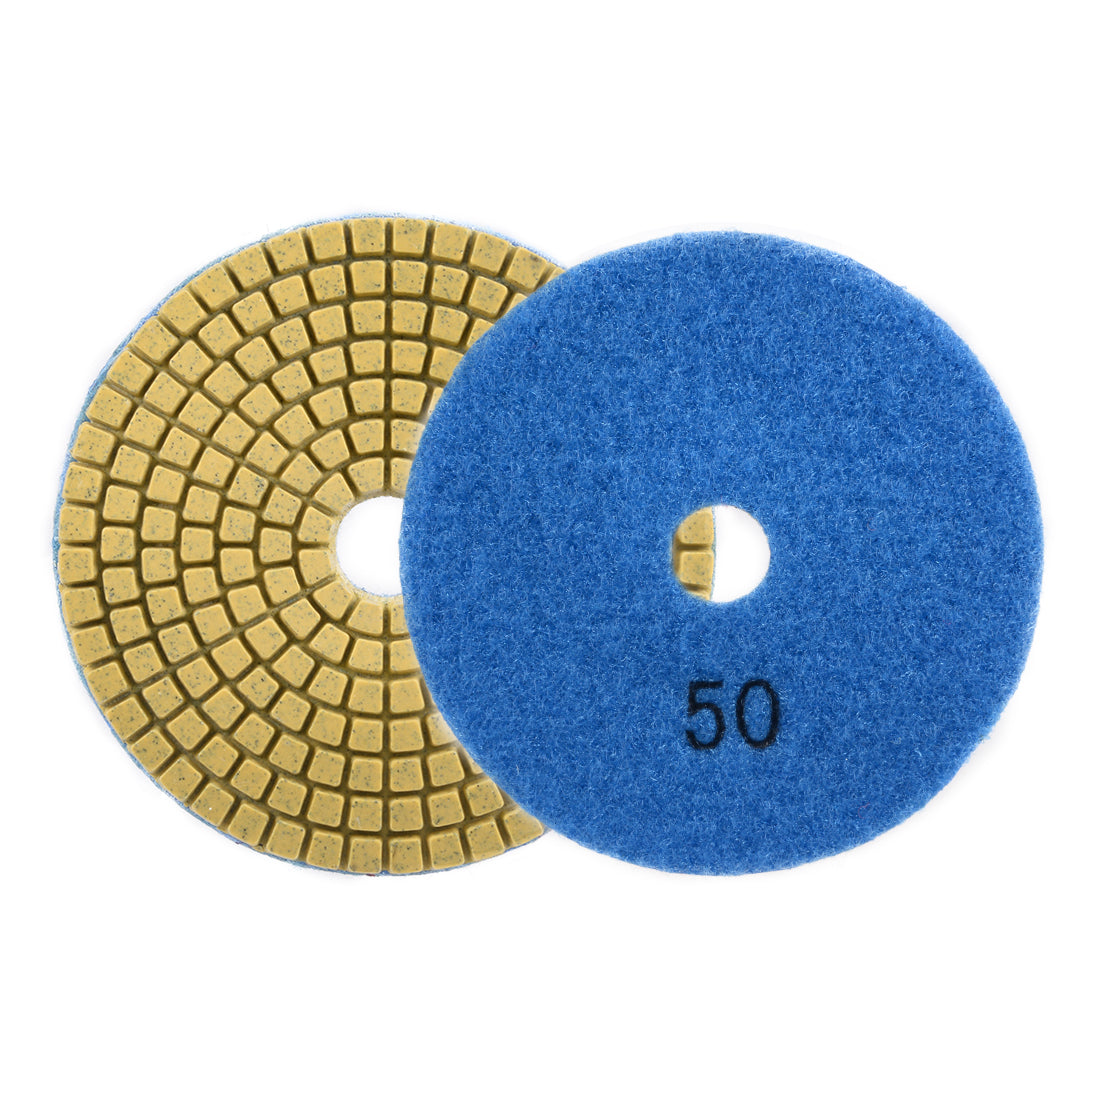 uxcell Uxcell Diamond Polishing Sanding Grinding Pads Discs 4 Inch Grit 50 2 Pcs for Granite Concrete Stone Marble